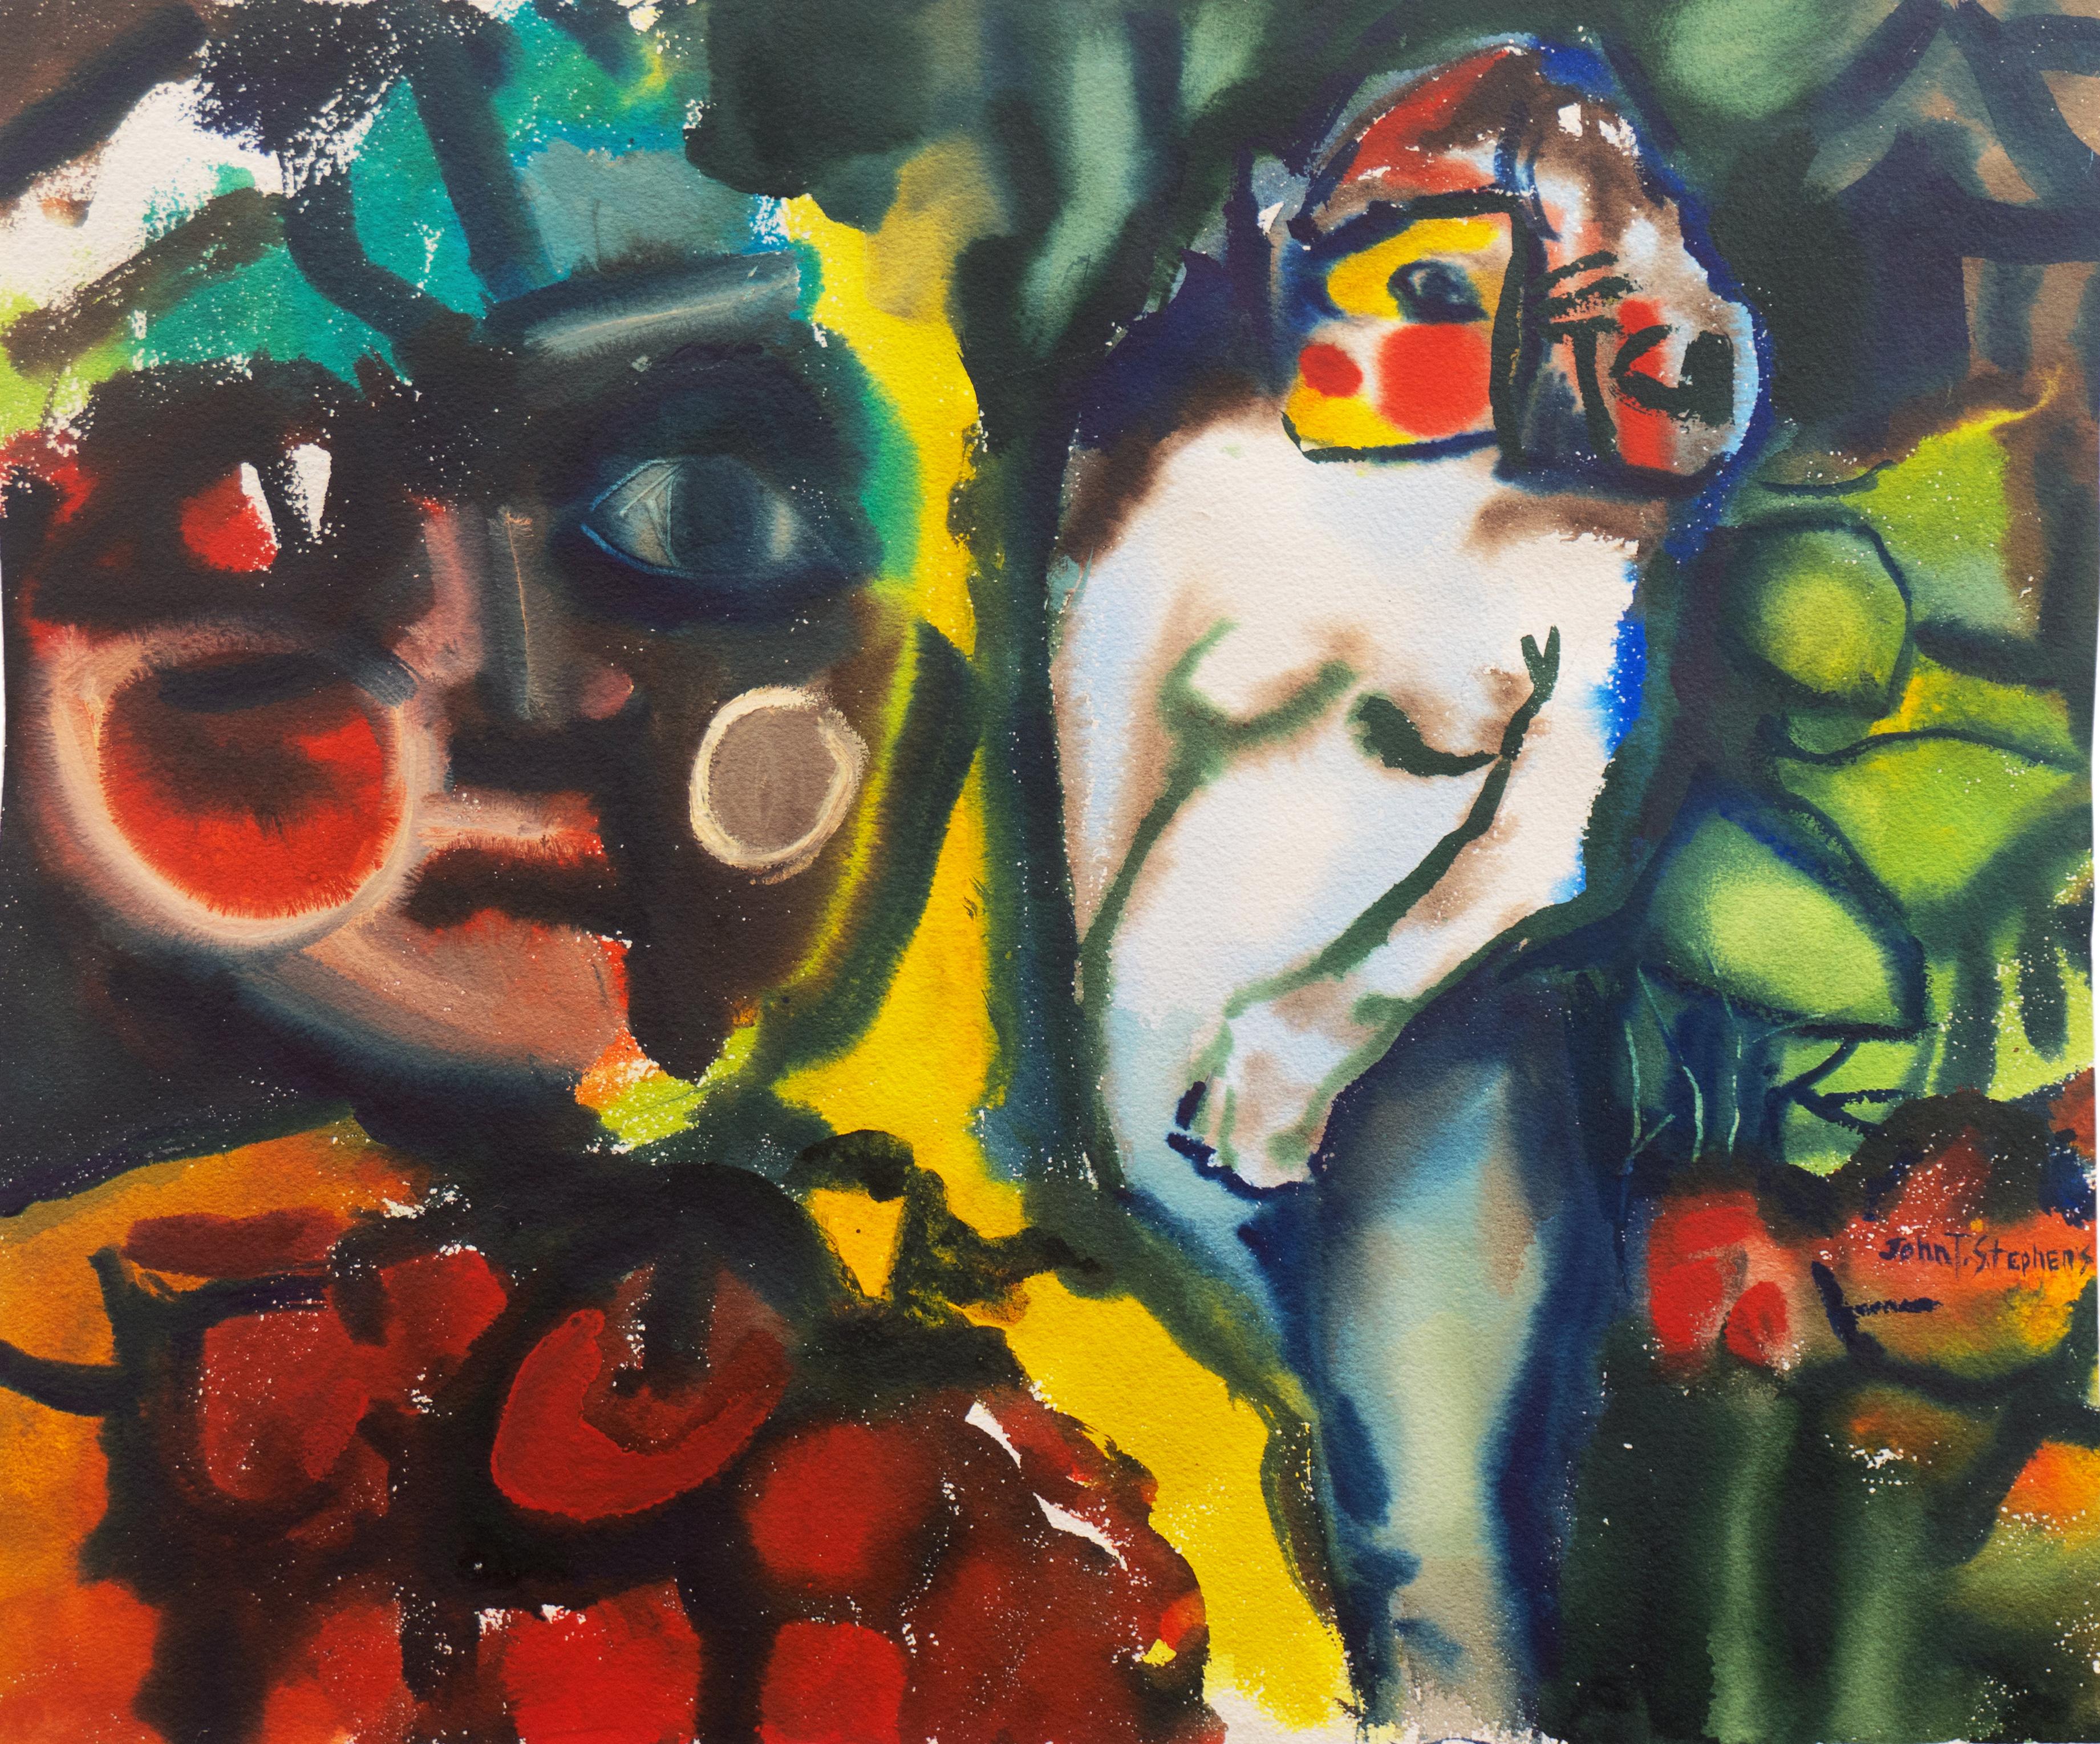 John T. Stephens Figurative Art - 'Leaving the Garden of Eden', Mid-century American Expressionist, Adam and Eve